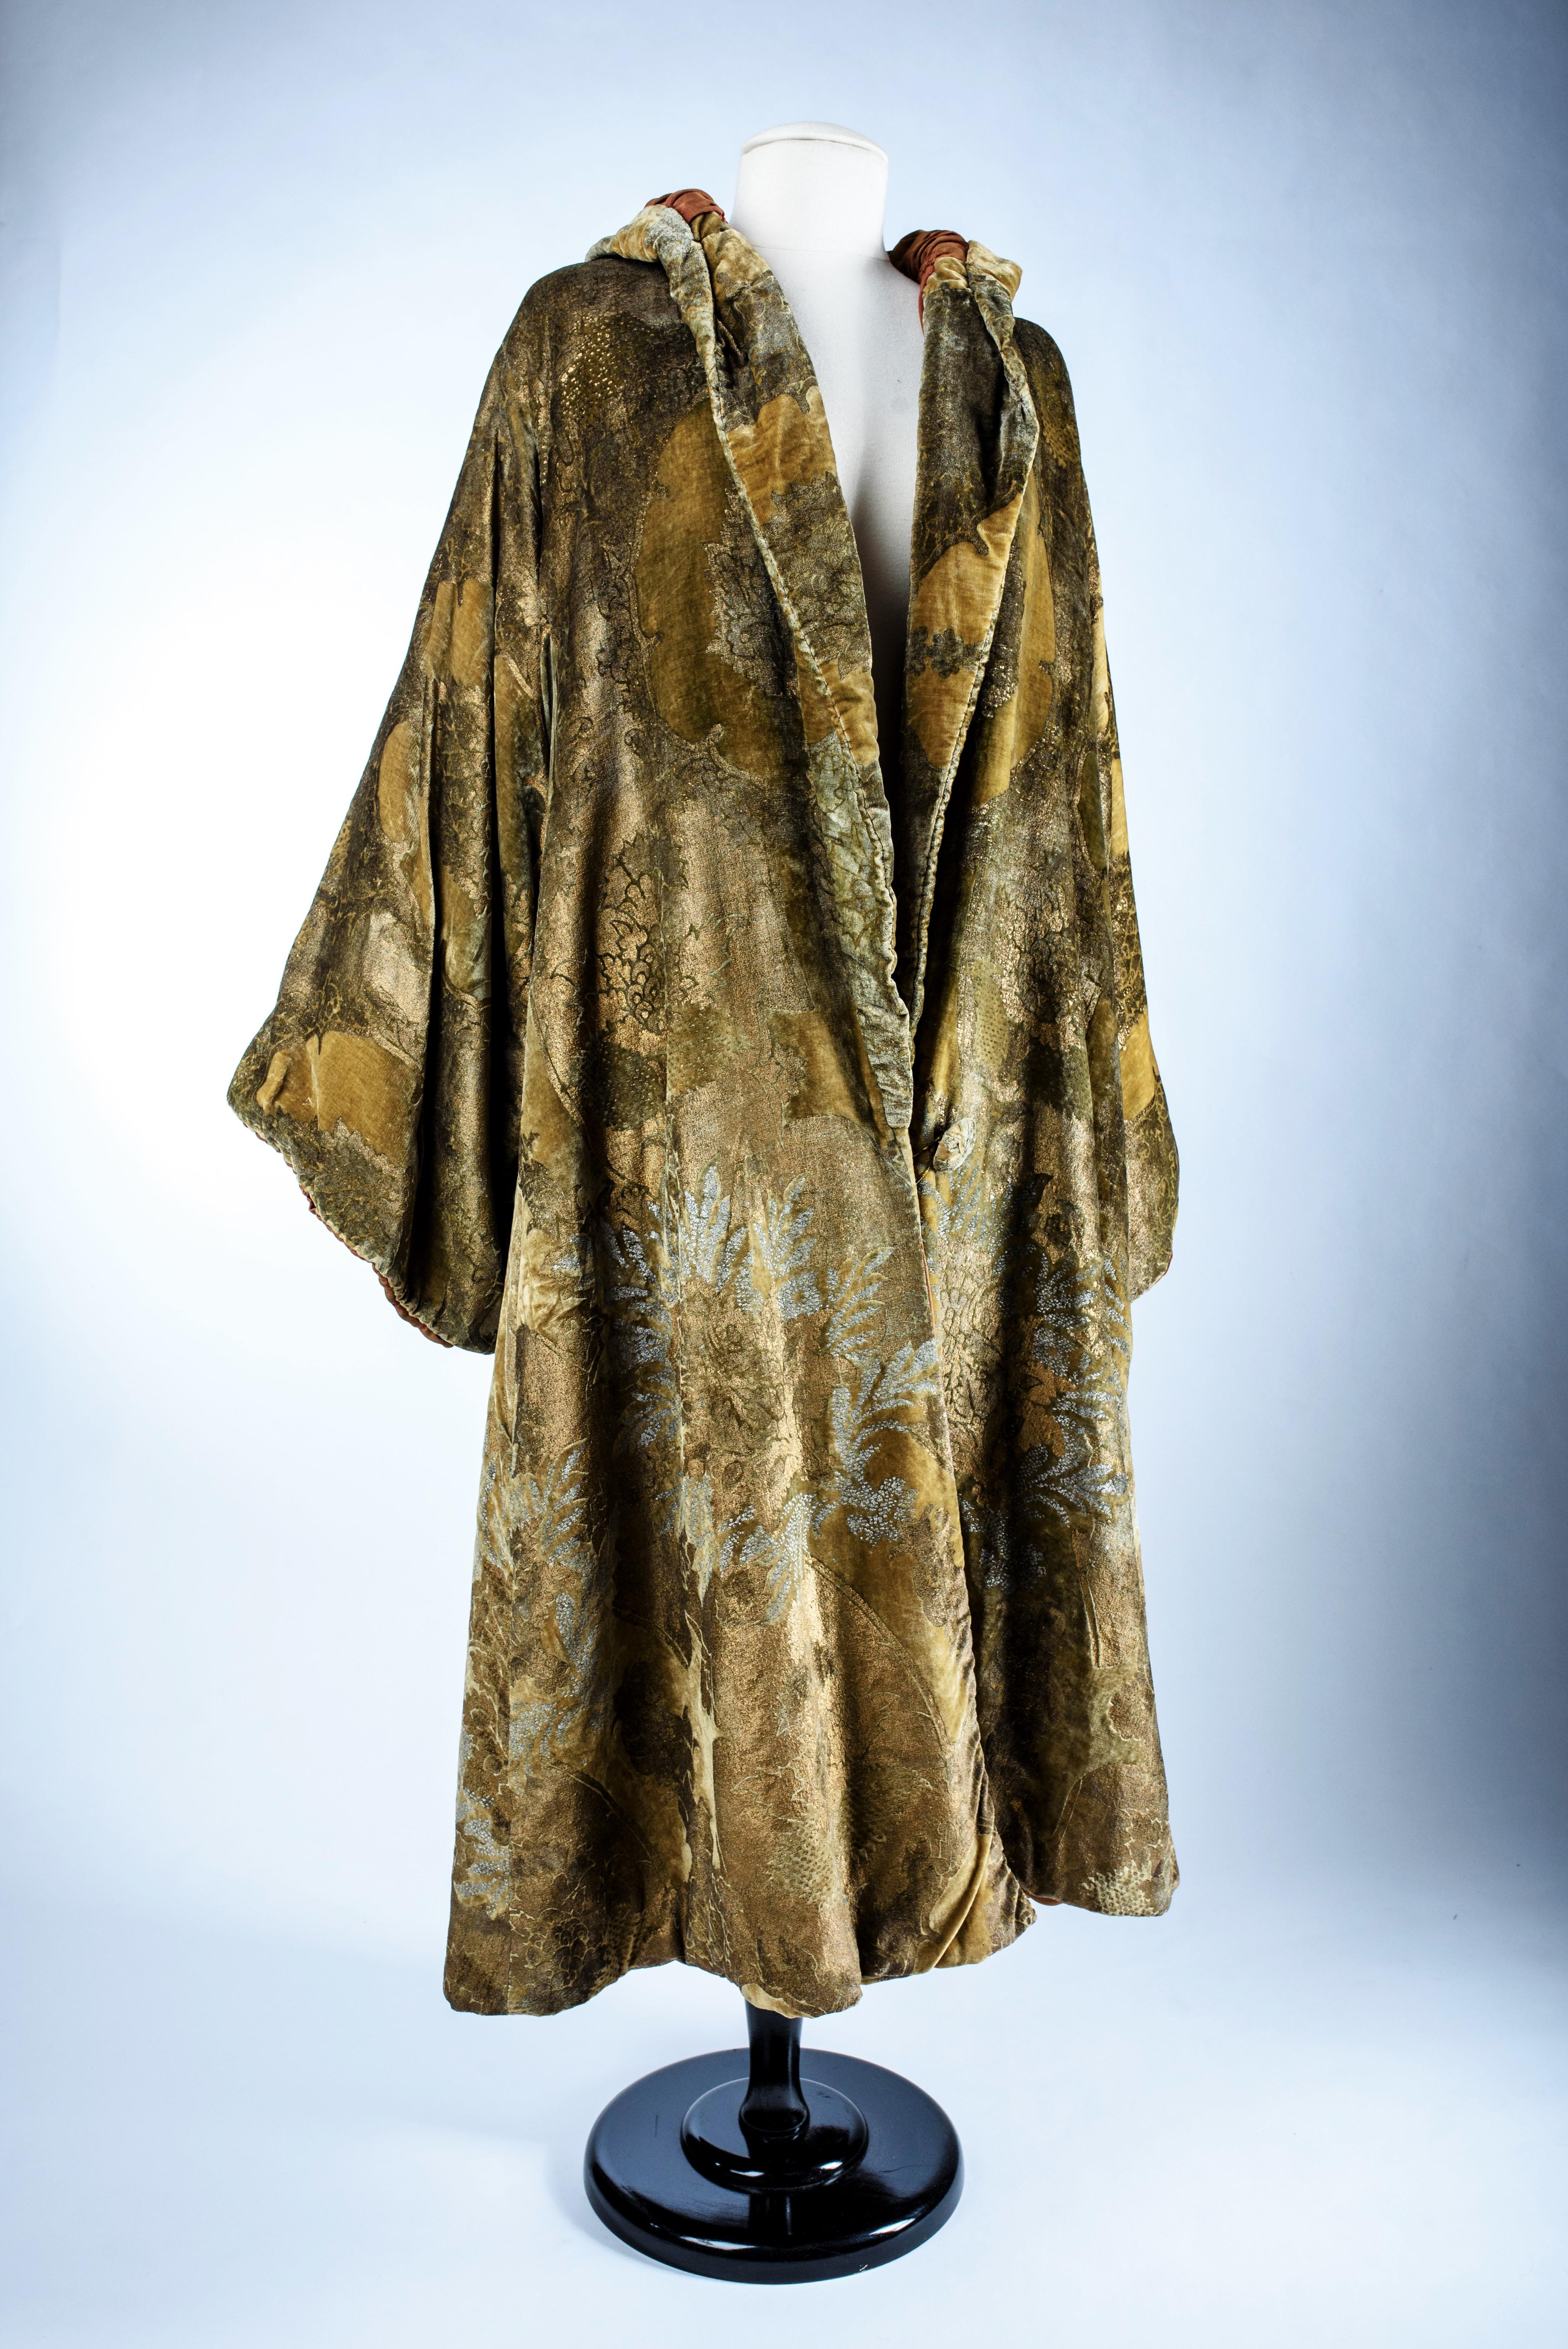 A Mariano Fortuny Gold and Silver Printed Velvet Evening Coat -Venice Circa 1925 11